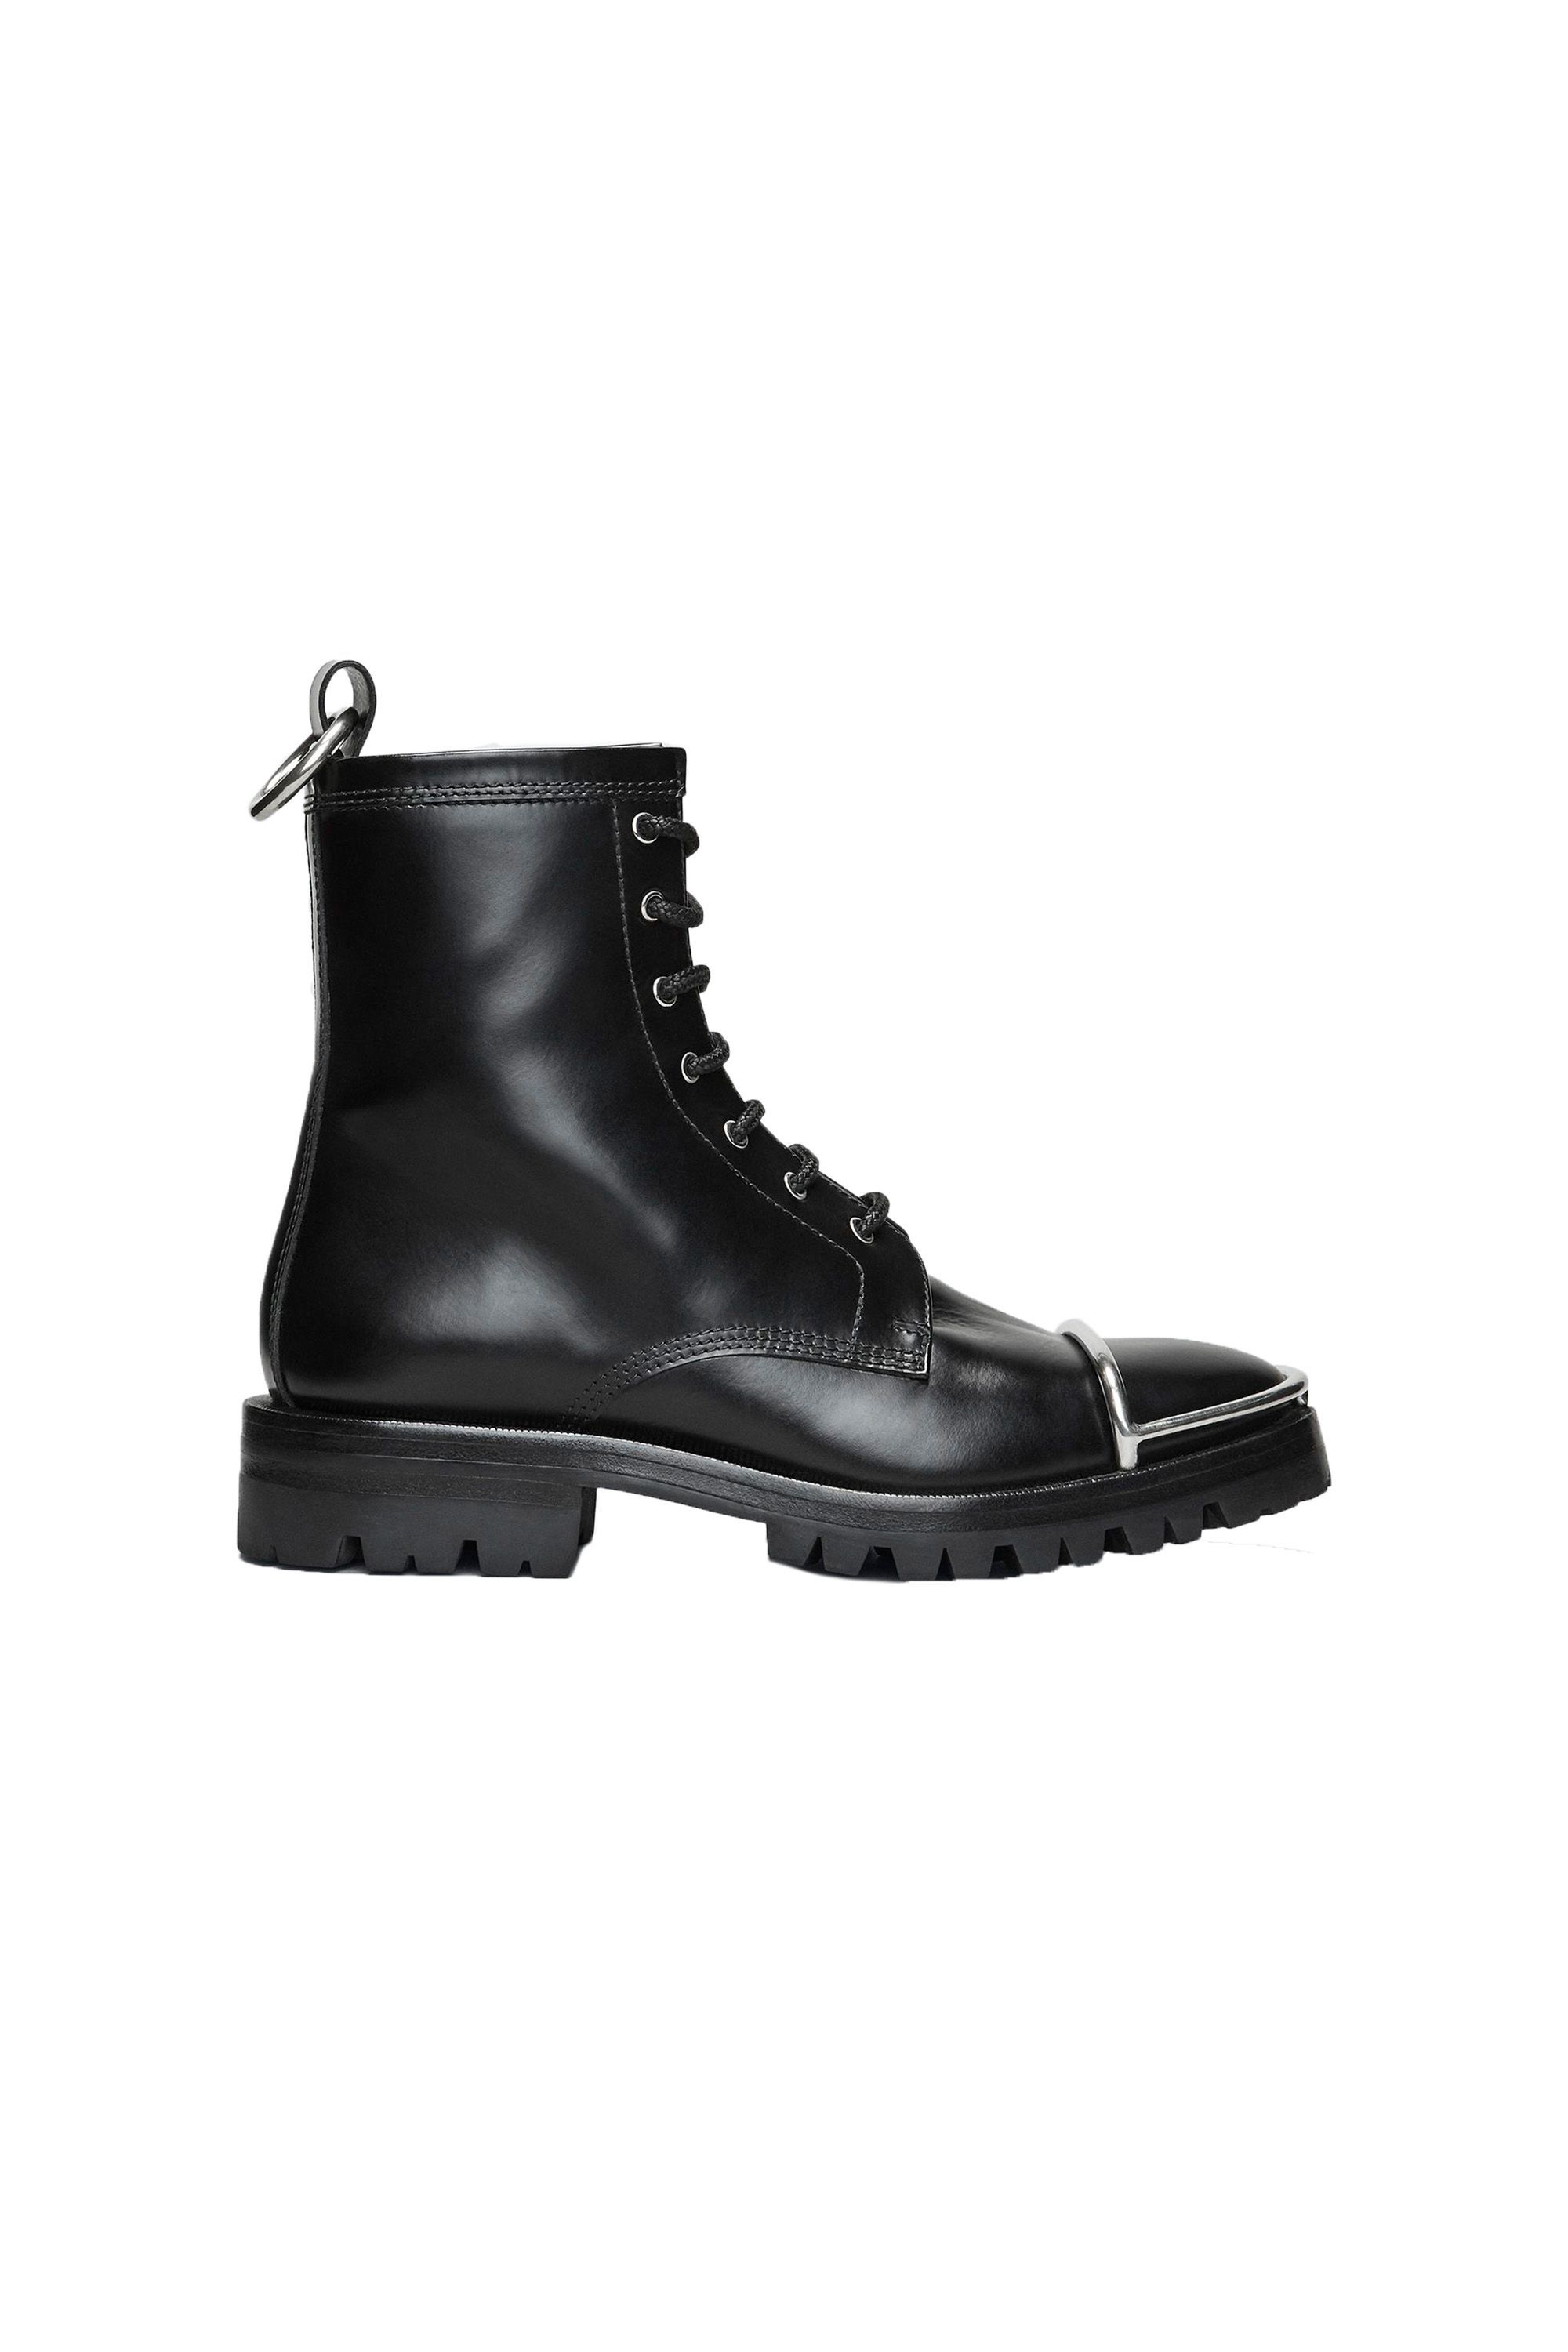 topshop artist lace up boots